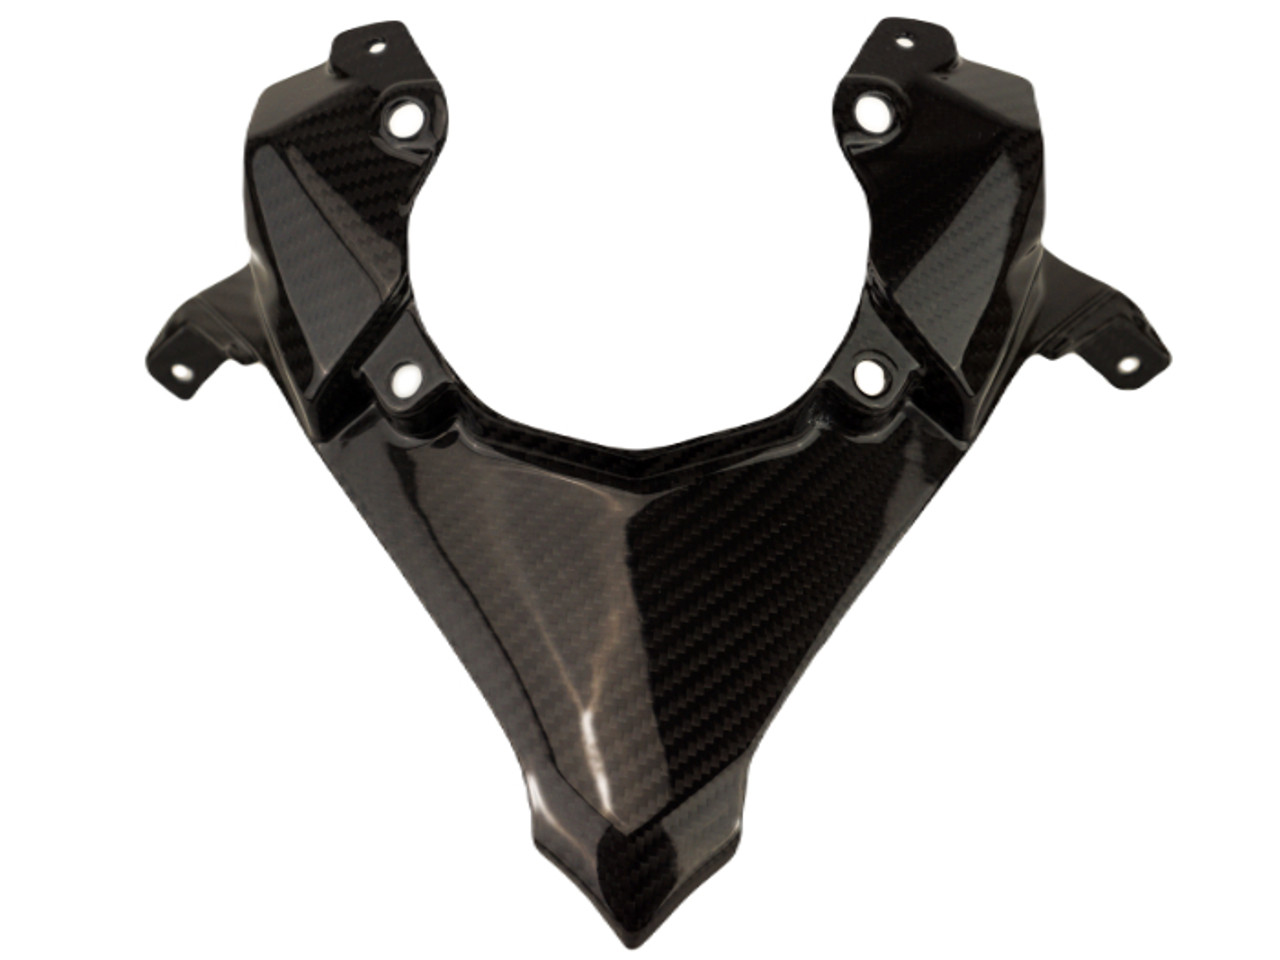 Top of Front Cowl in Glossy Twill Weave 100% Carbon Fiber for Kawasaki Z650 2020+